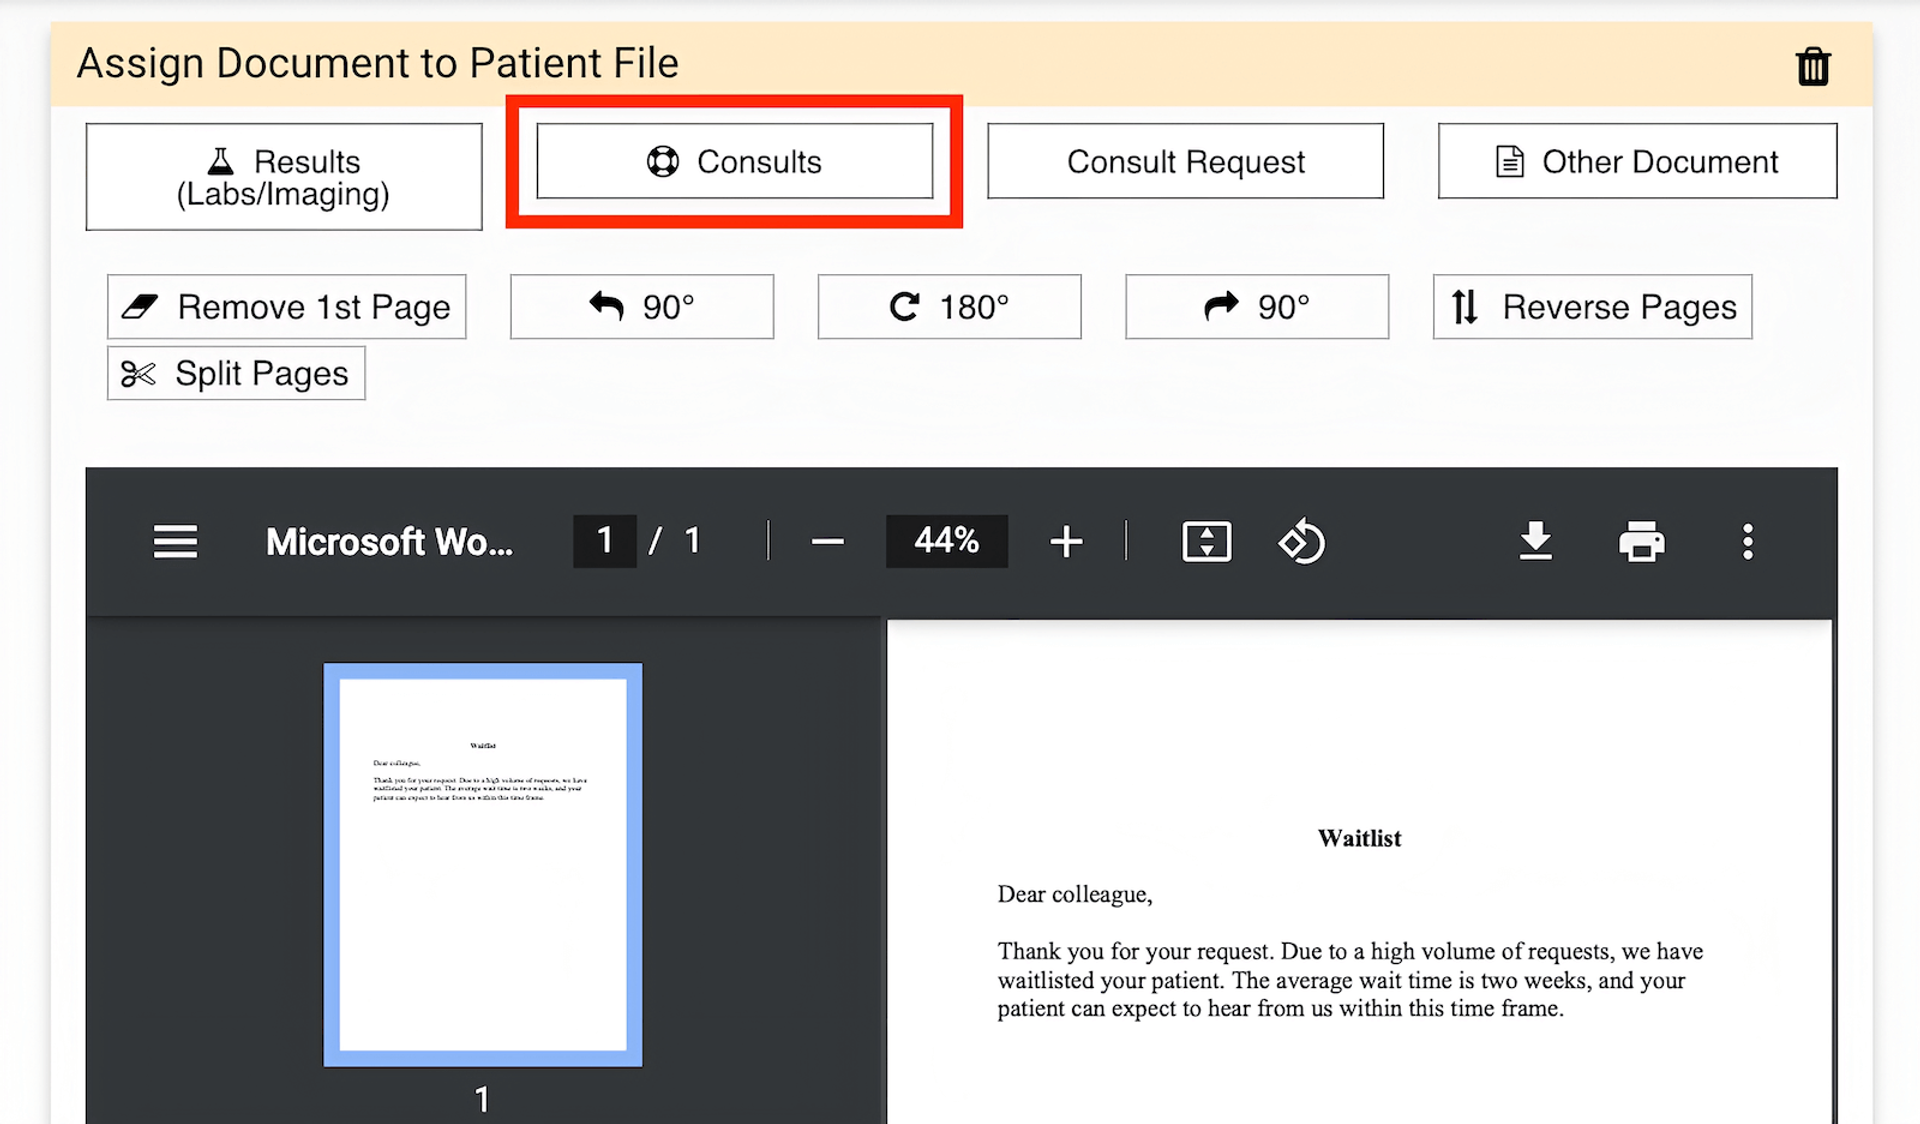 Assign Document to Patient File workspace with 'Consults' button highlighted in red.